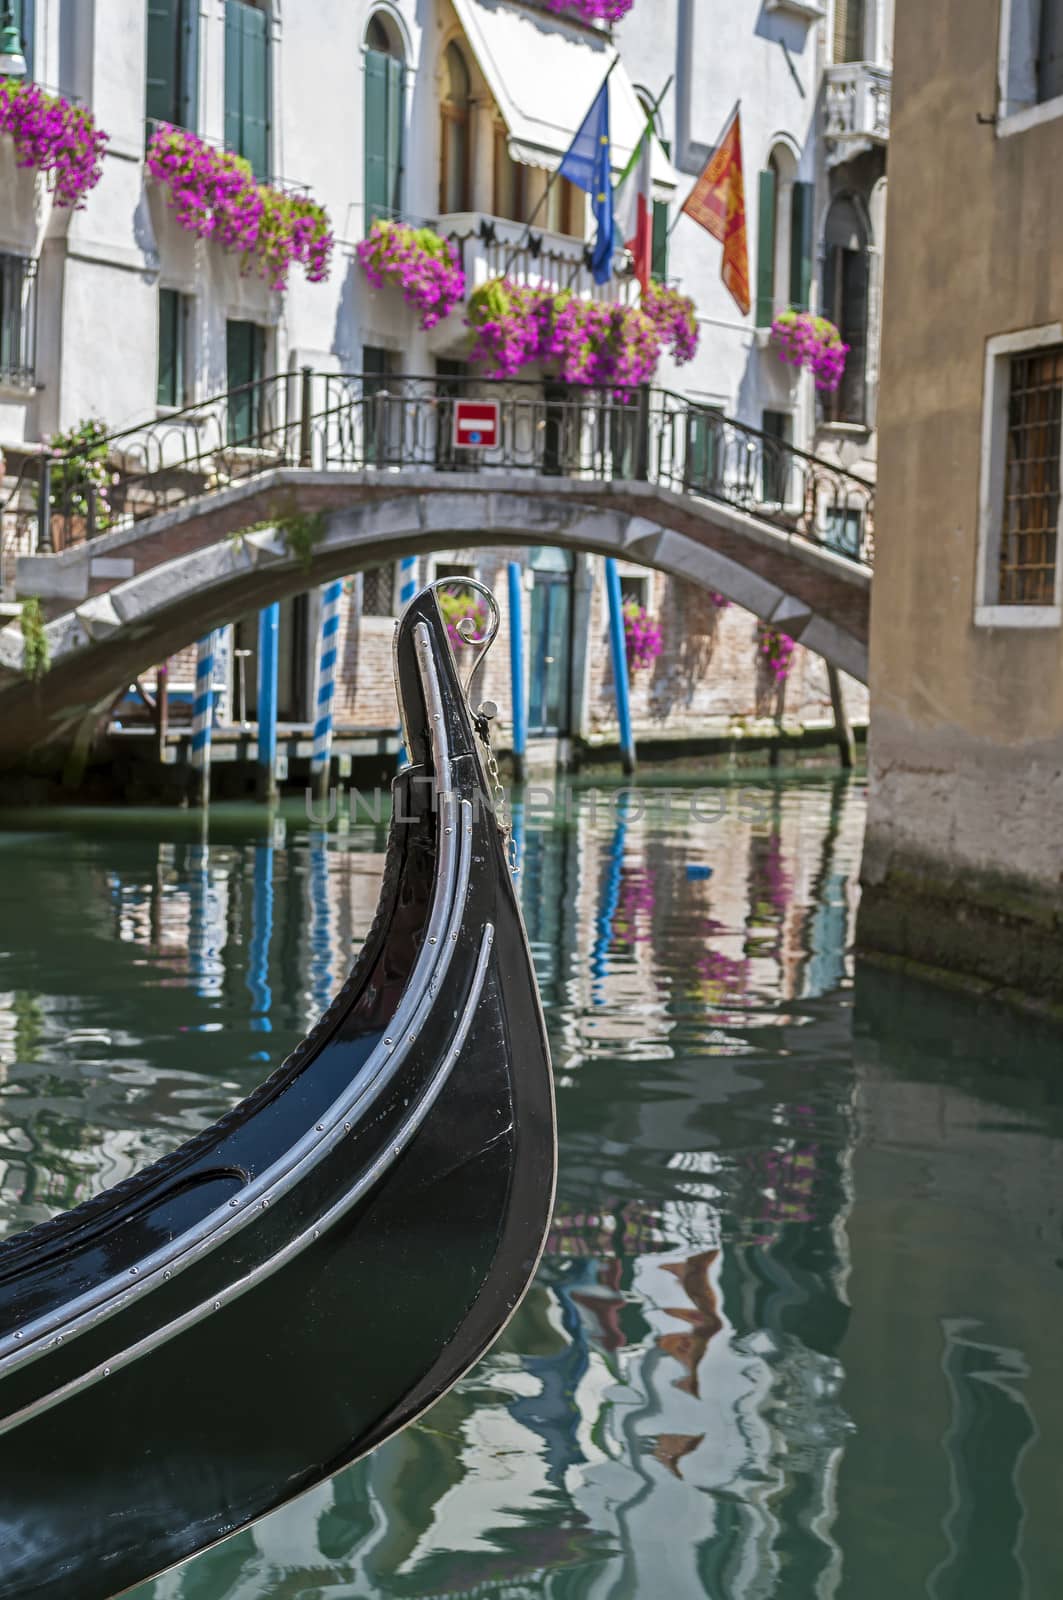 Gondola in Venice. by FER737NG